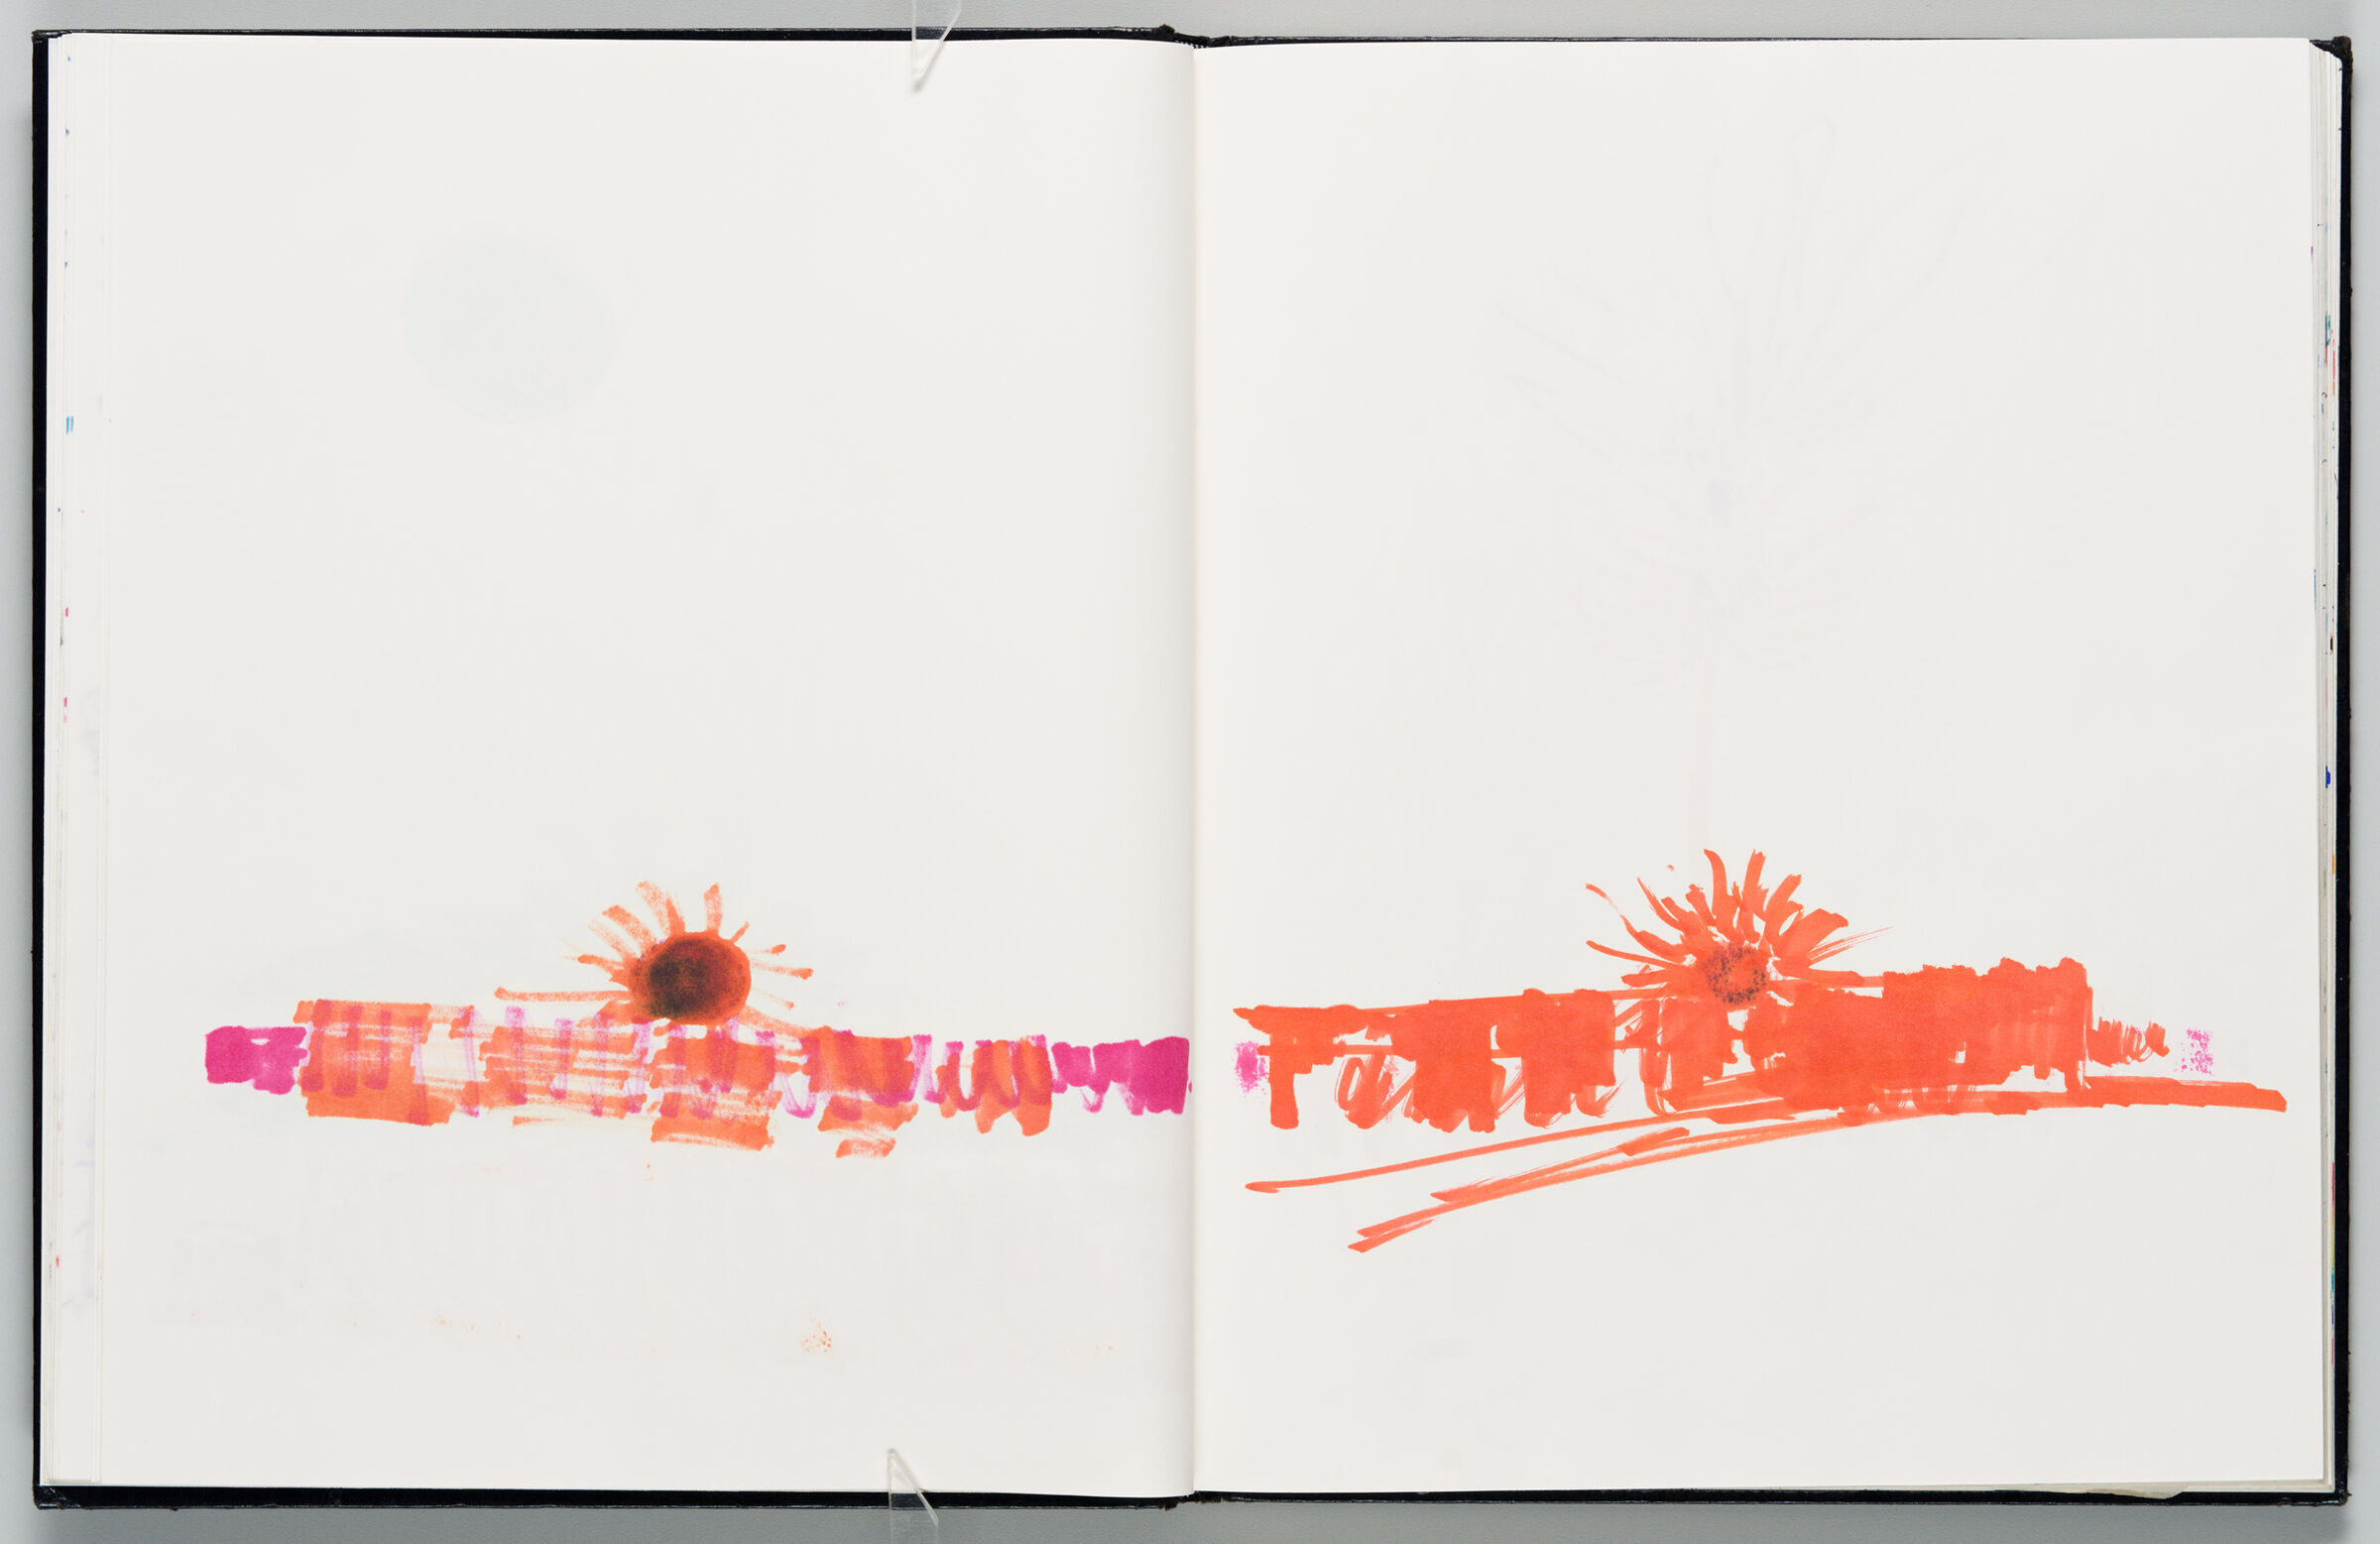 Untitled (Bleed-Through Of Previous Page With Color Transfer, Left Page); Untitled (Sun Design For Installation At Obscure In Quebec City, Right Page)